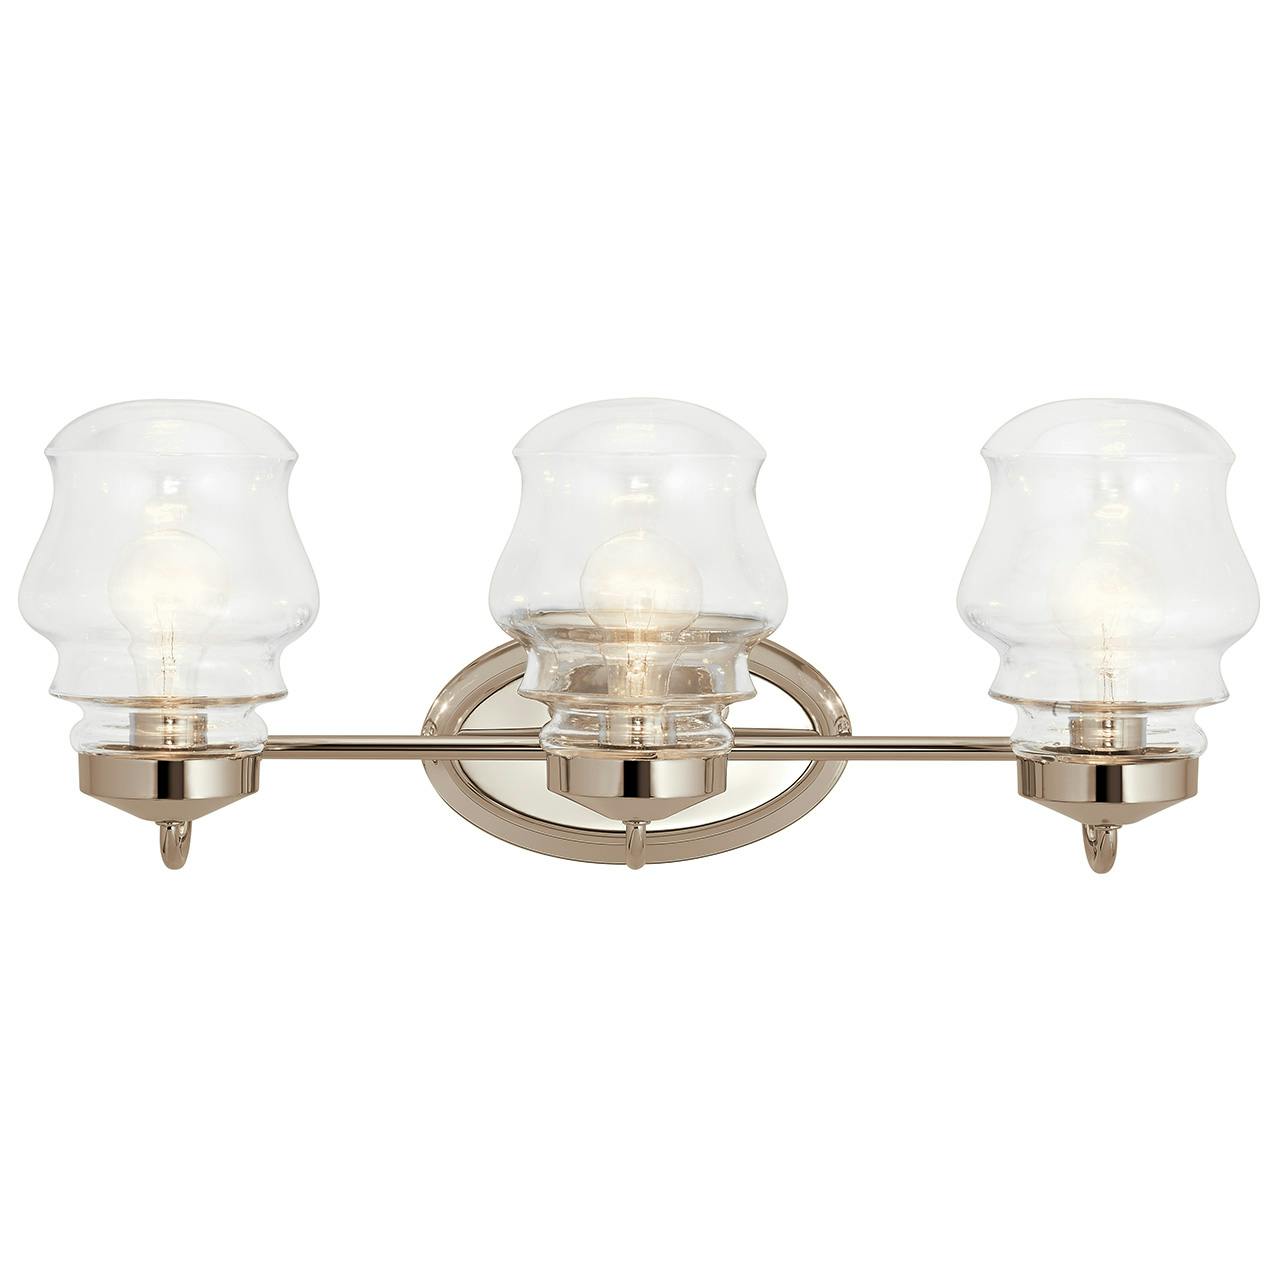 The Janiel 3 Light Vanity Light Nickel facing up on a white background